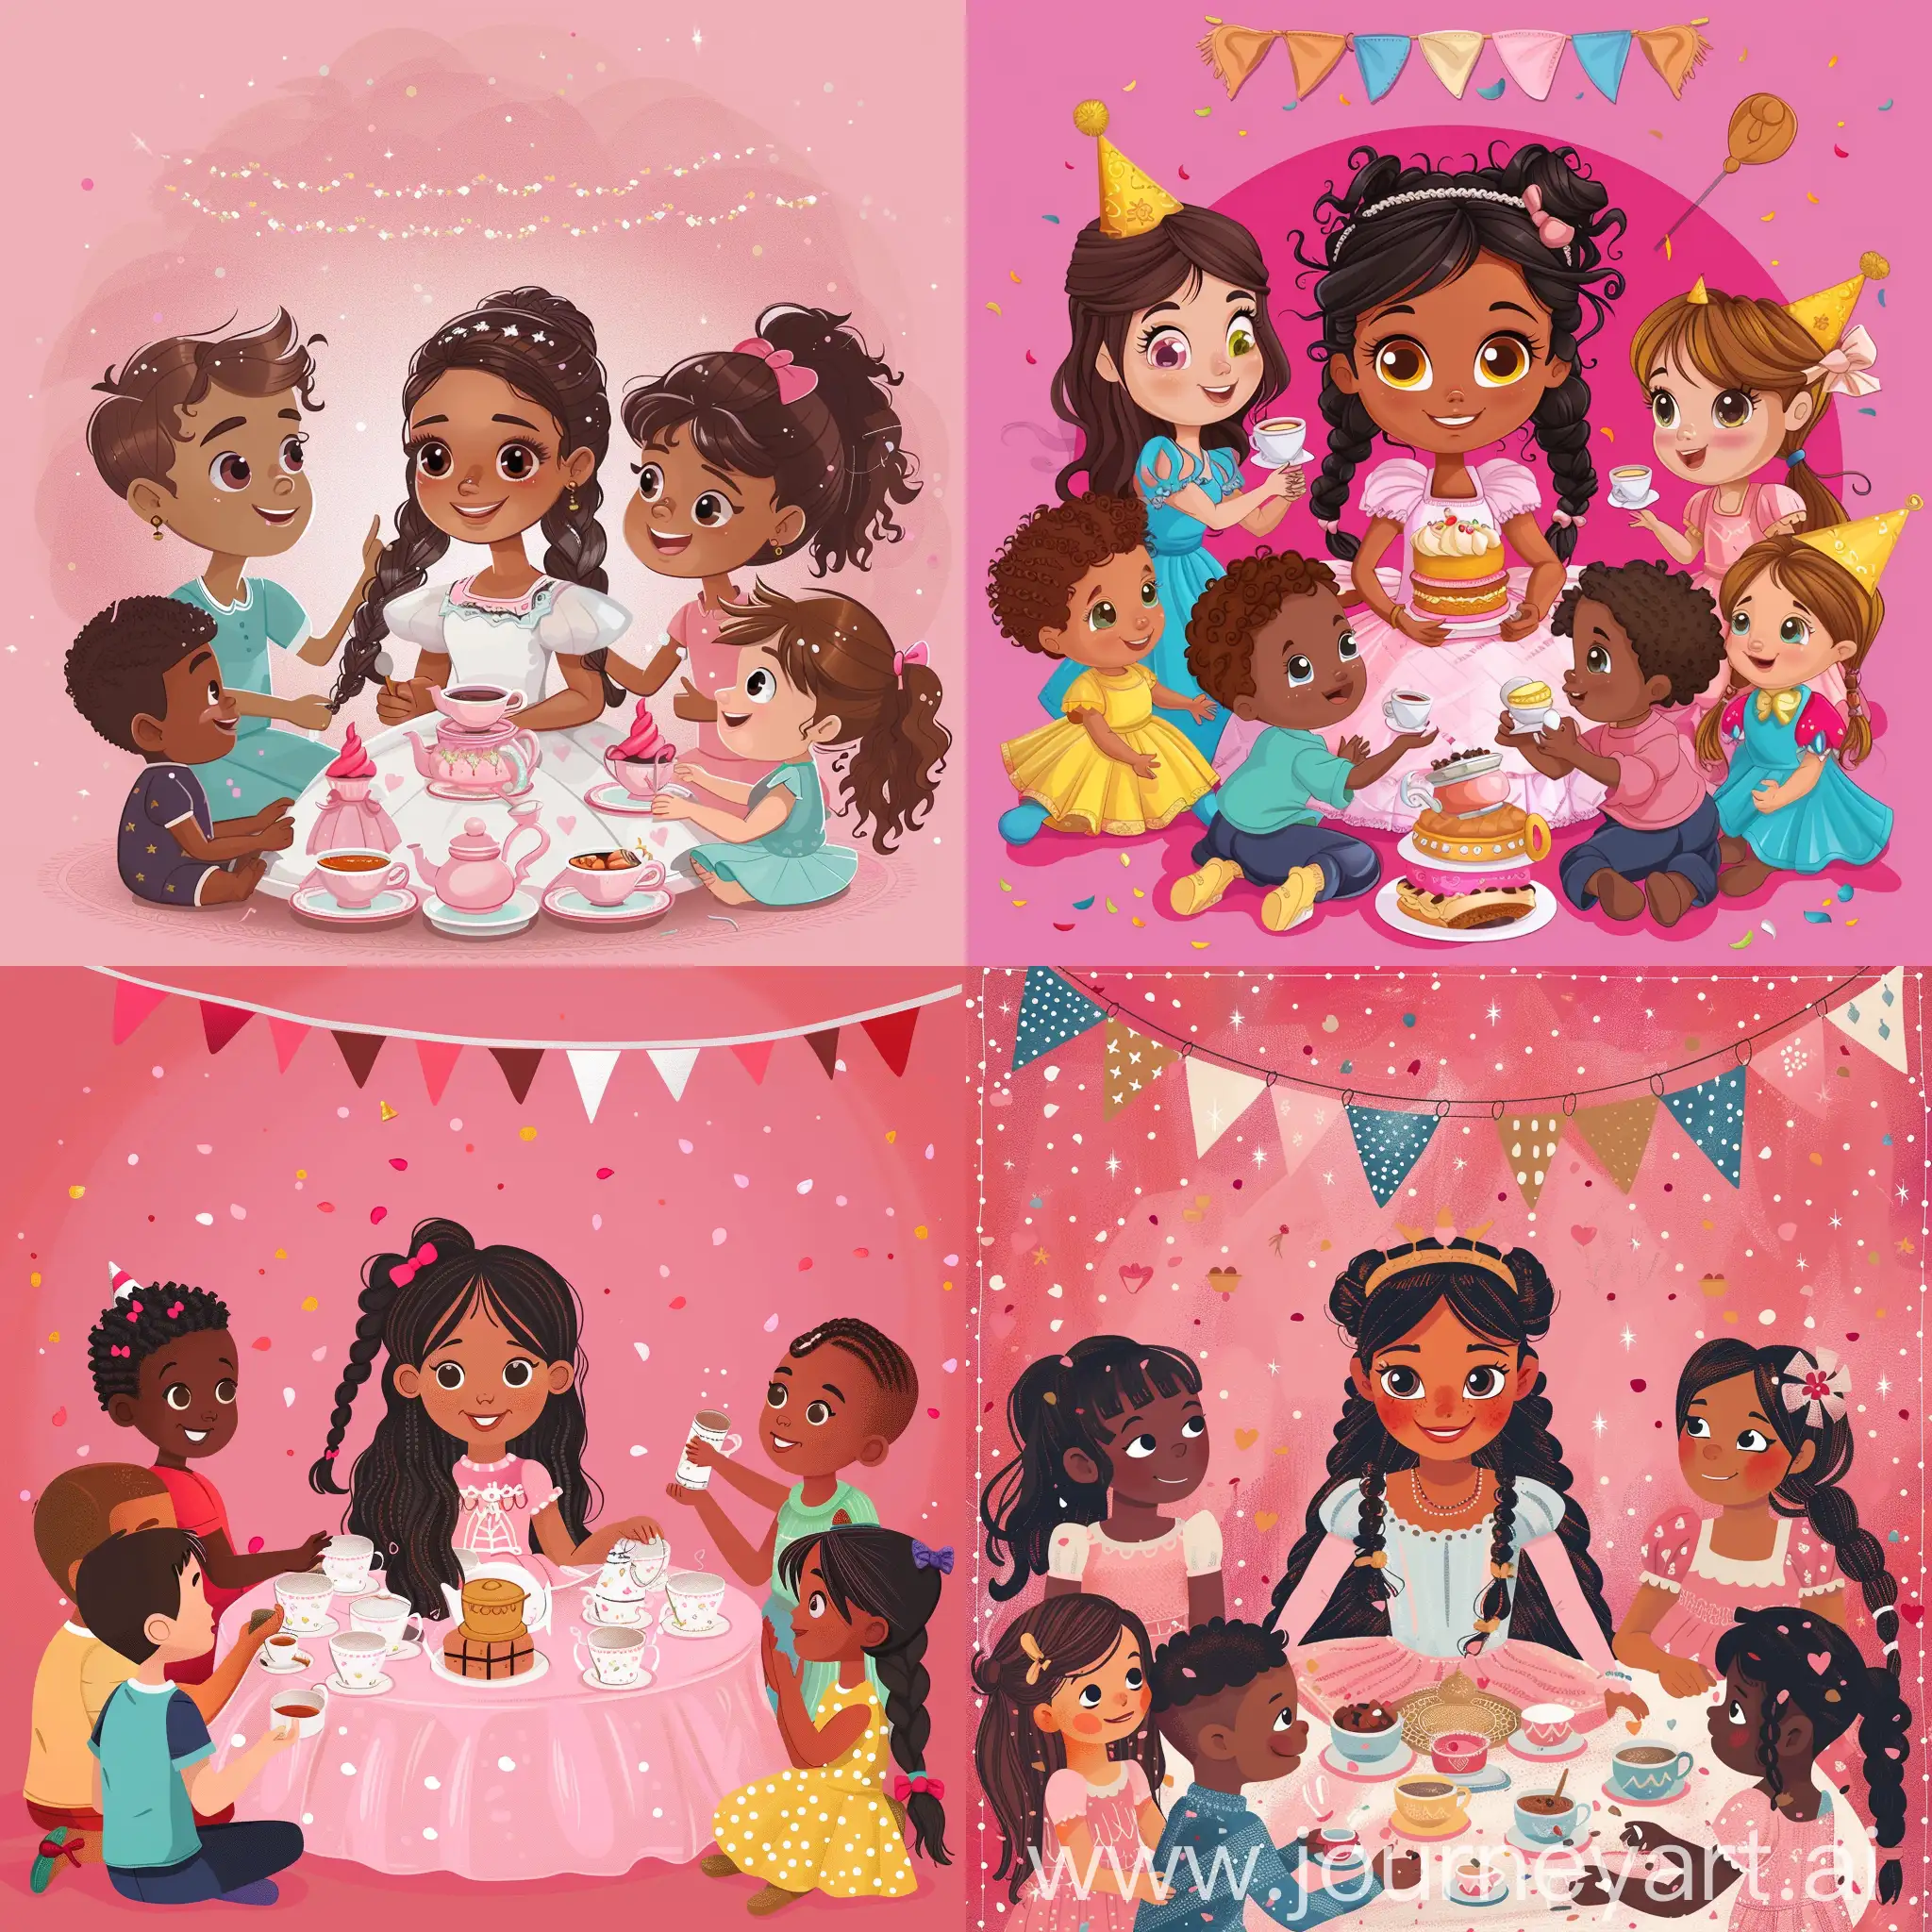 Black Cartoon princess, with braids in her hair, sitting with friends boys and girls, boys at the tea party and girls at party, tea party, hot pink background , toddler , fancy dress, birthday poster.